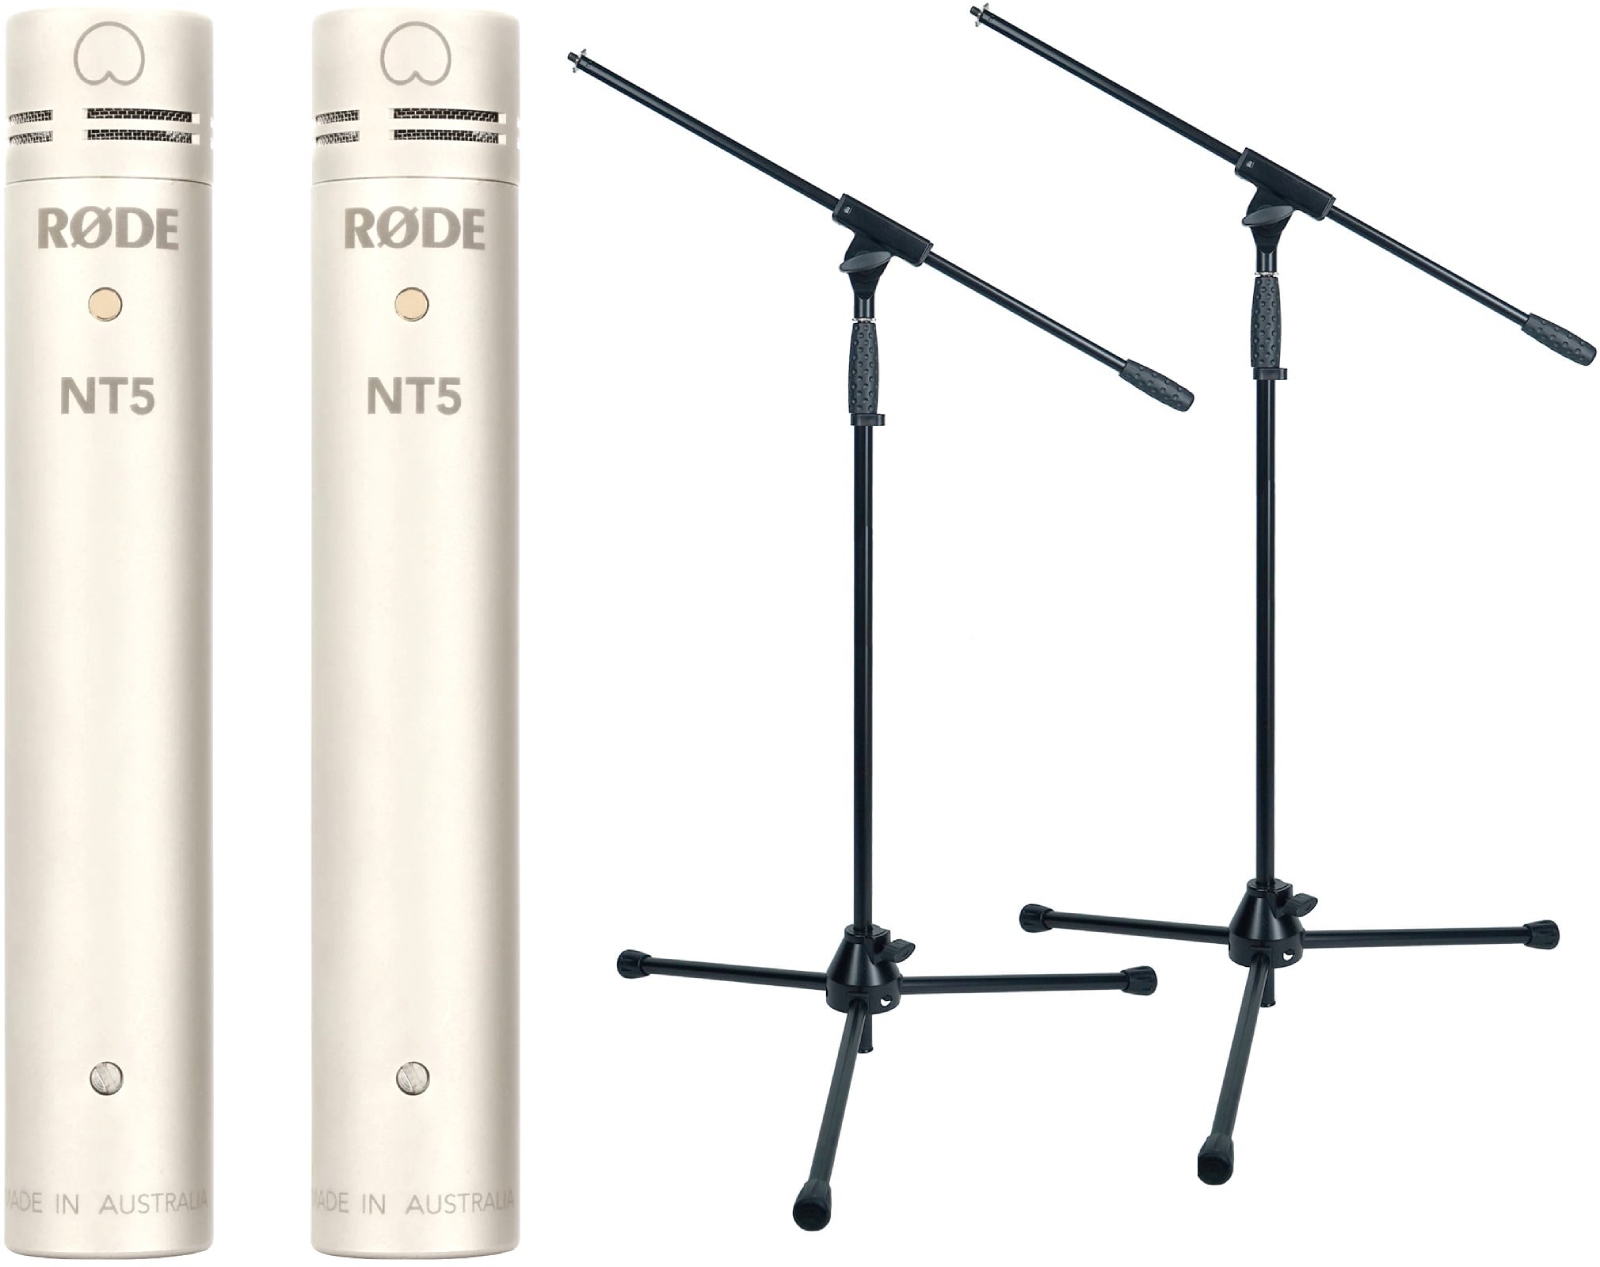 RODE NT5 MP STAND BUNDLE